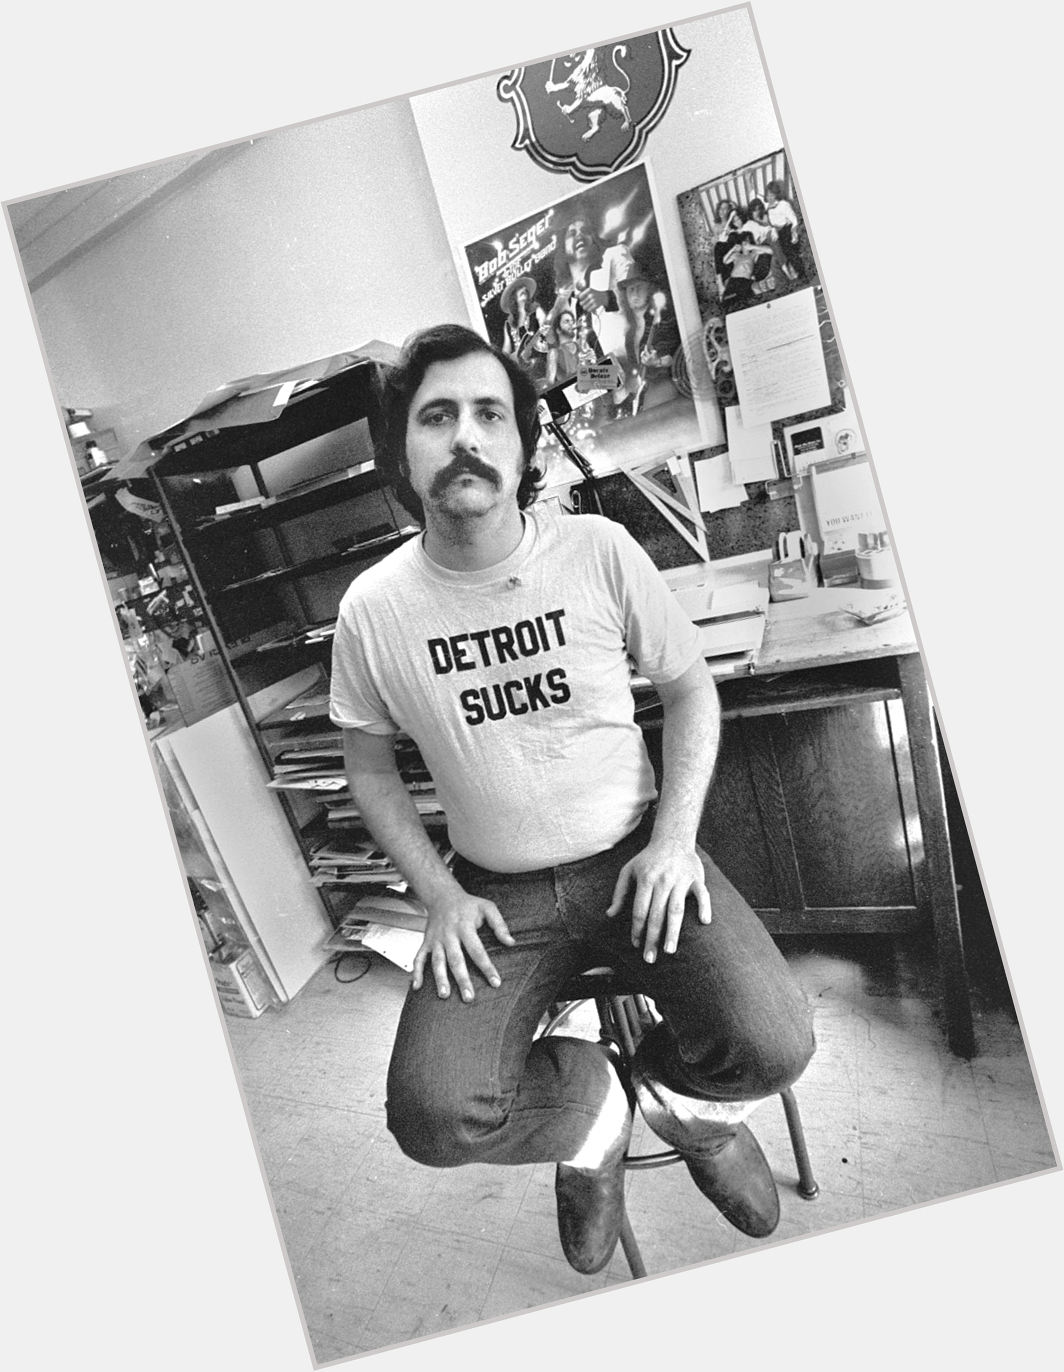 Happy birthday Lester Bangs. Your words were amazing and your time too brief. 